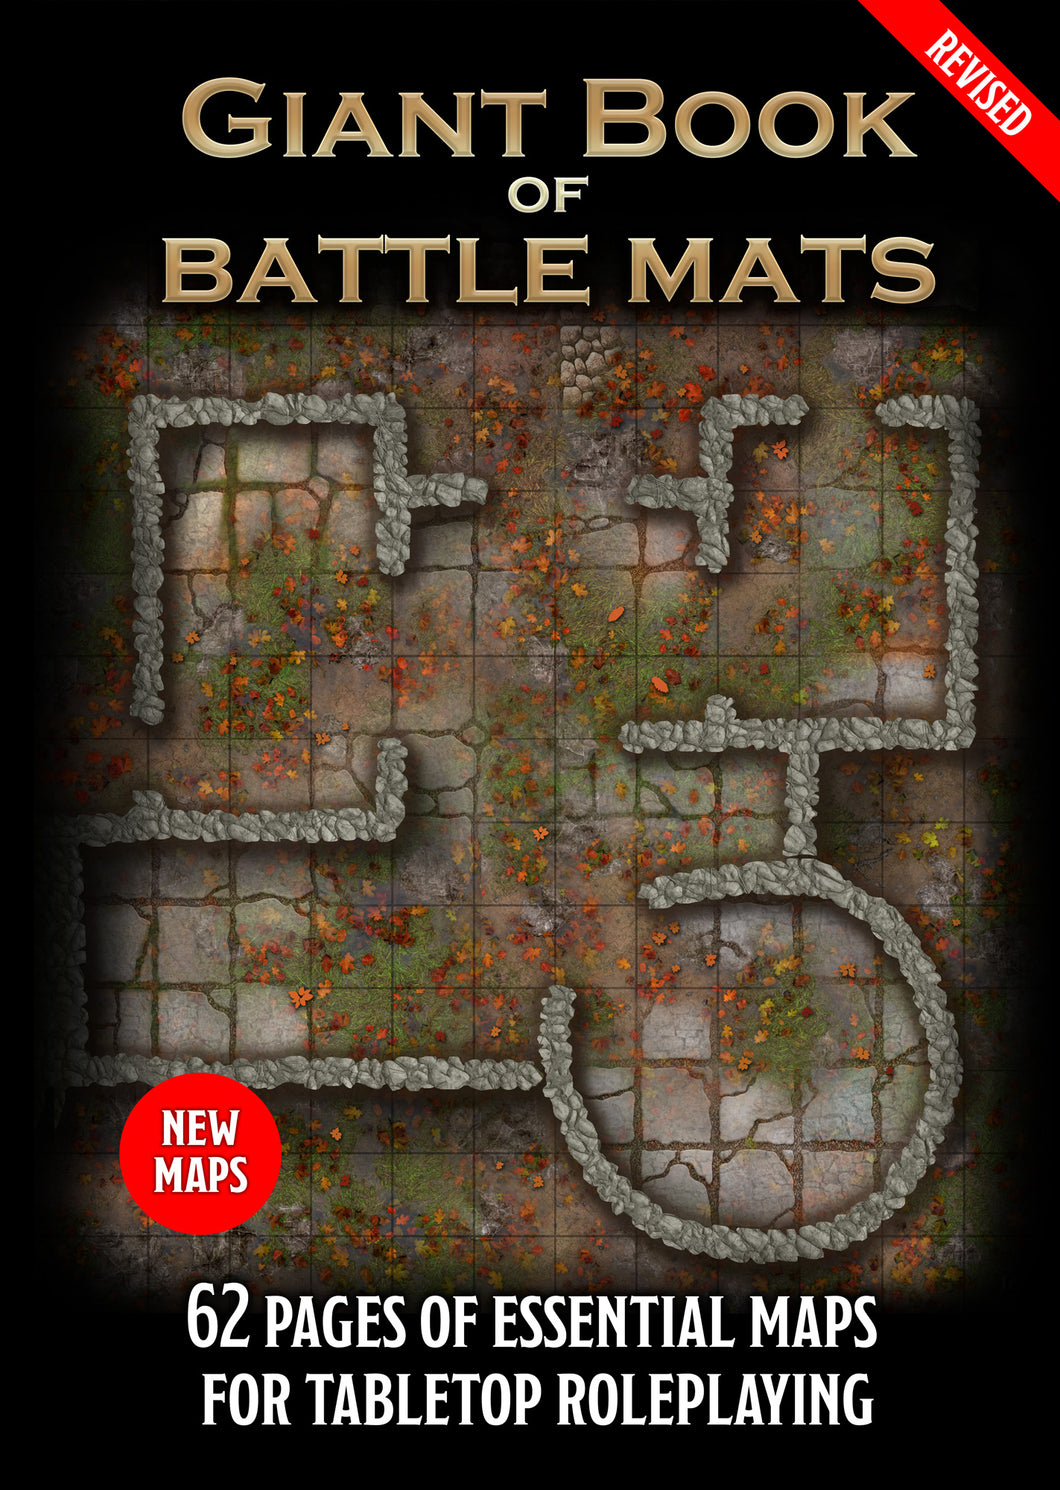 Giant Book of Battle Mats (Revised) - 12X16